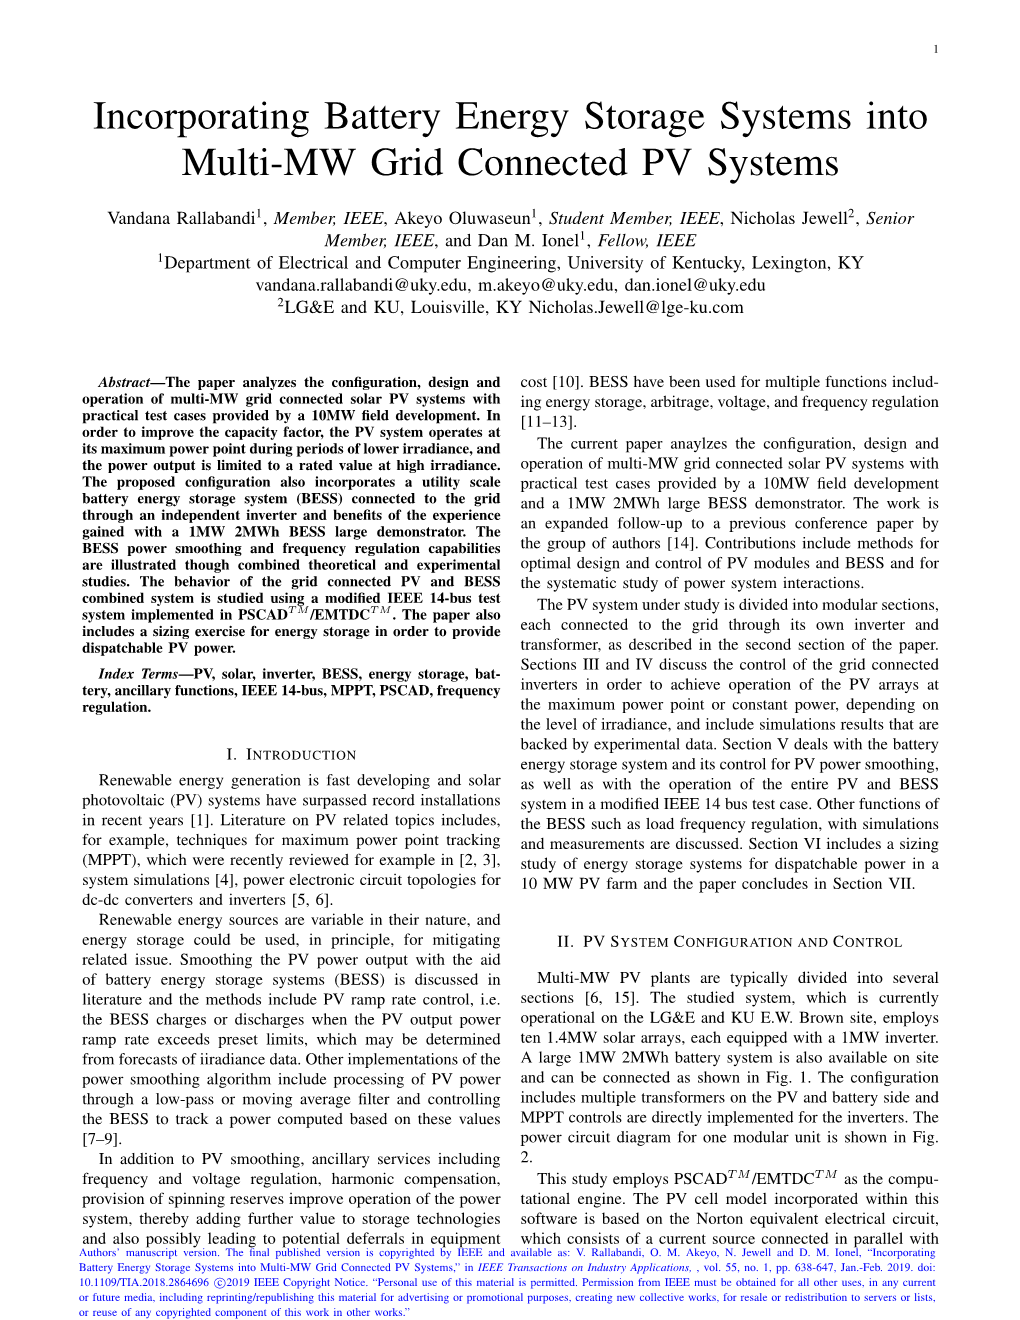 Incorporating Battery Energy Storage Systems Into Multi-MW Grid Connected PV Systems